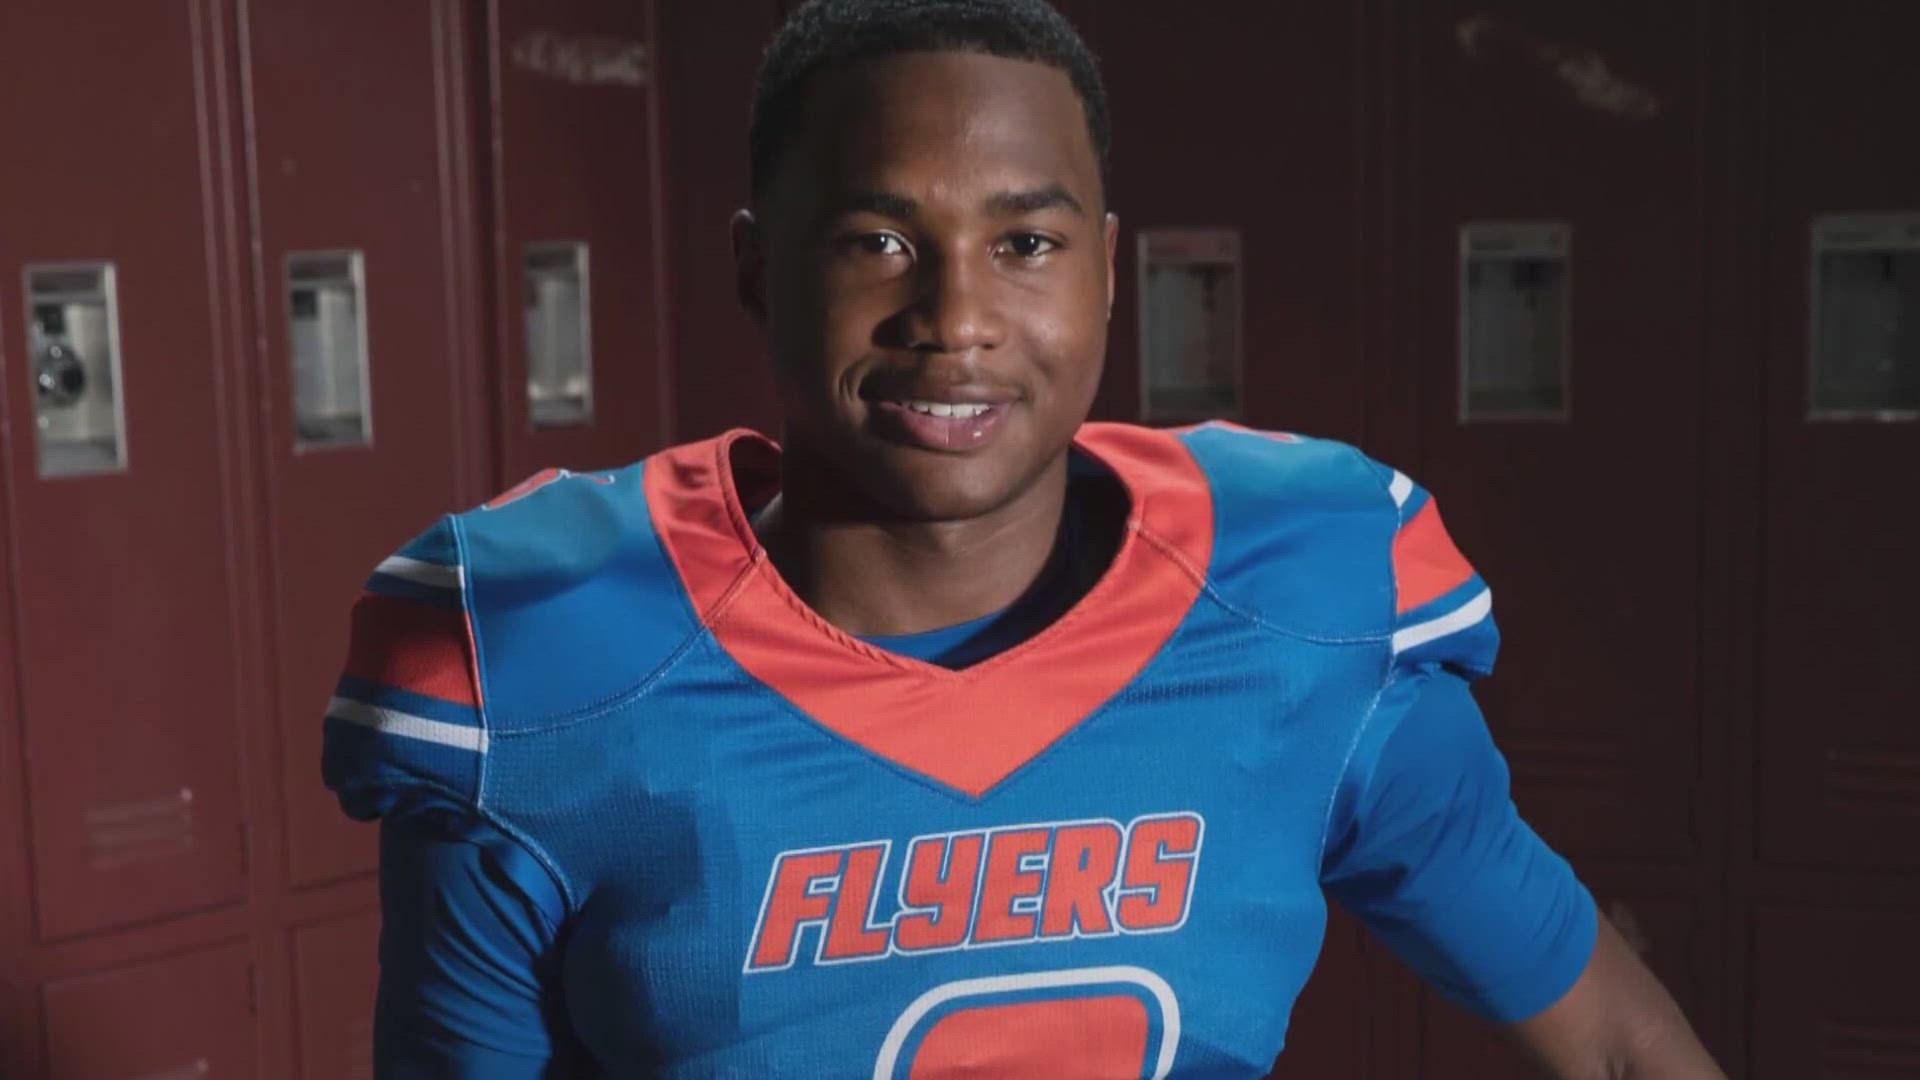 Jaylon McKenzie was a rising star in the Metro East. He was 14 years old and already a nationally recognized football player with scholarship offers.